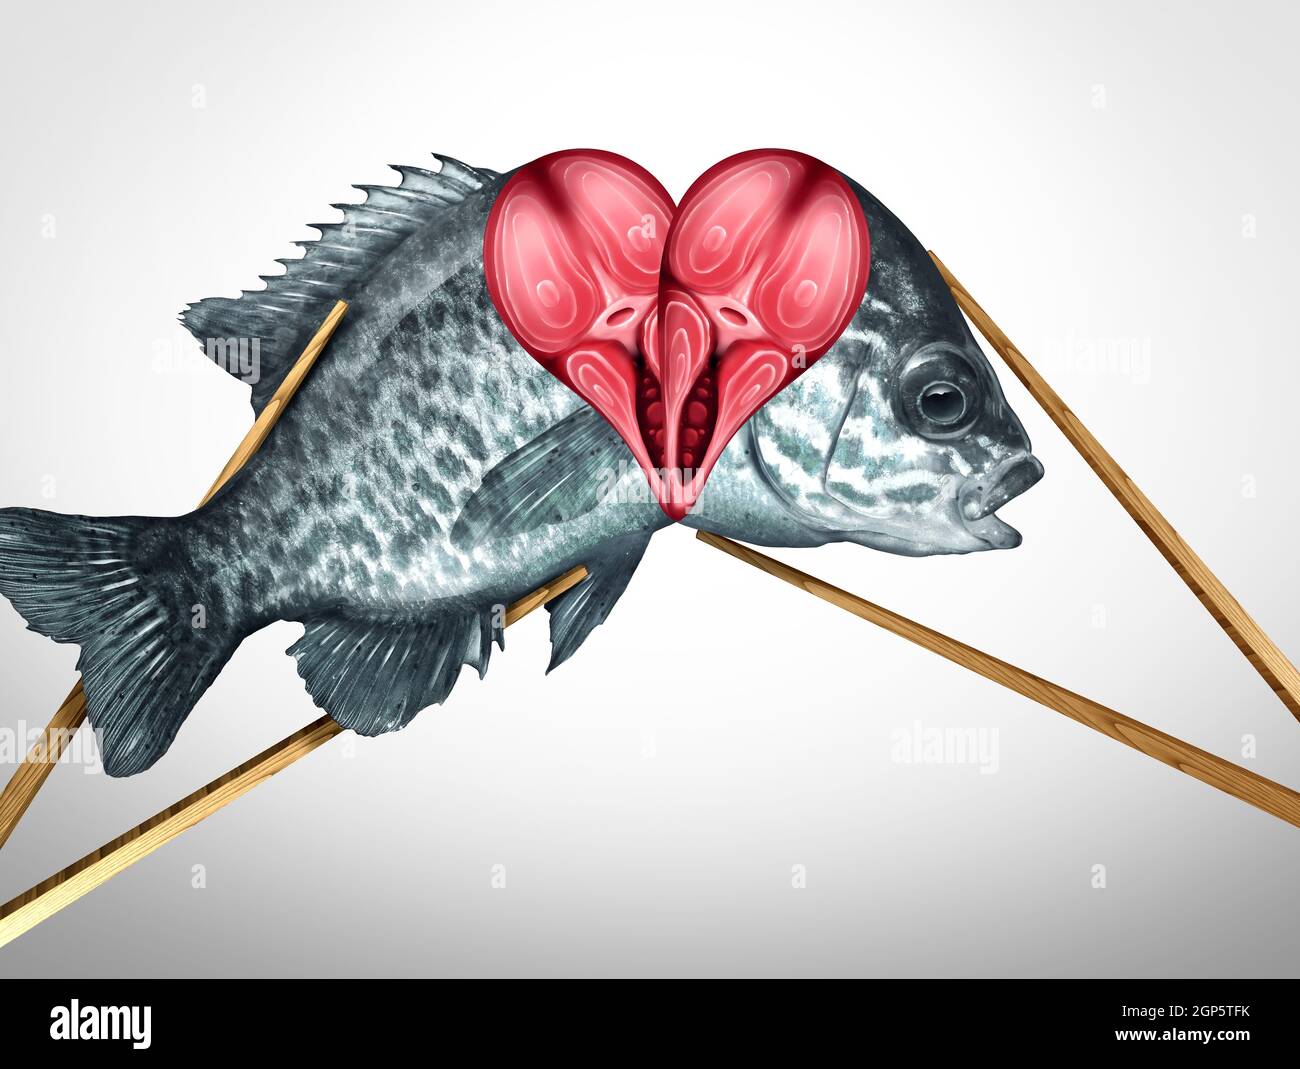 Sushi love concept and fresh fish Dinner for two dining and romantic date symbol as a couple of chopsticks holding seafood with a heart shape. Stock Photo